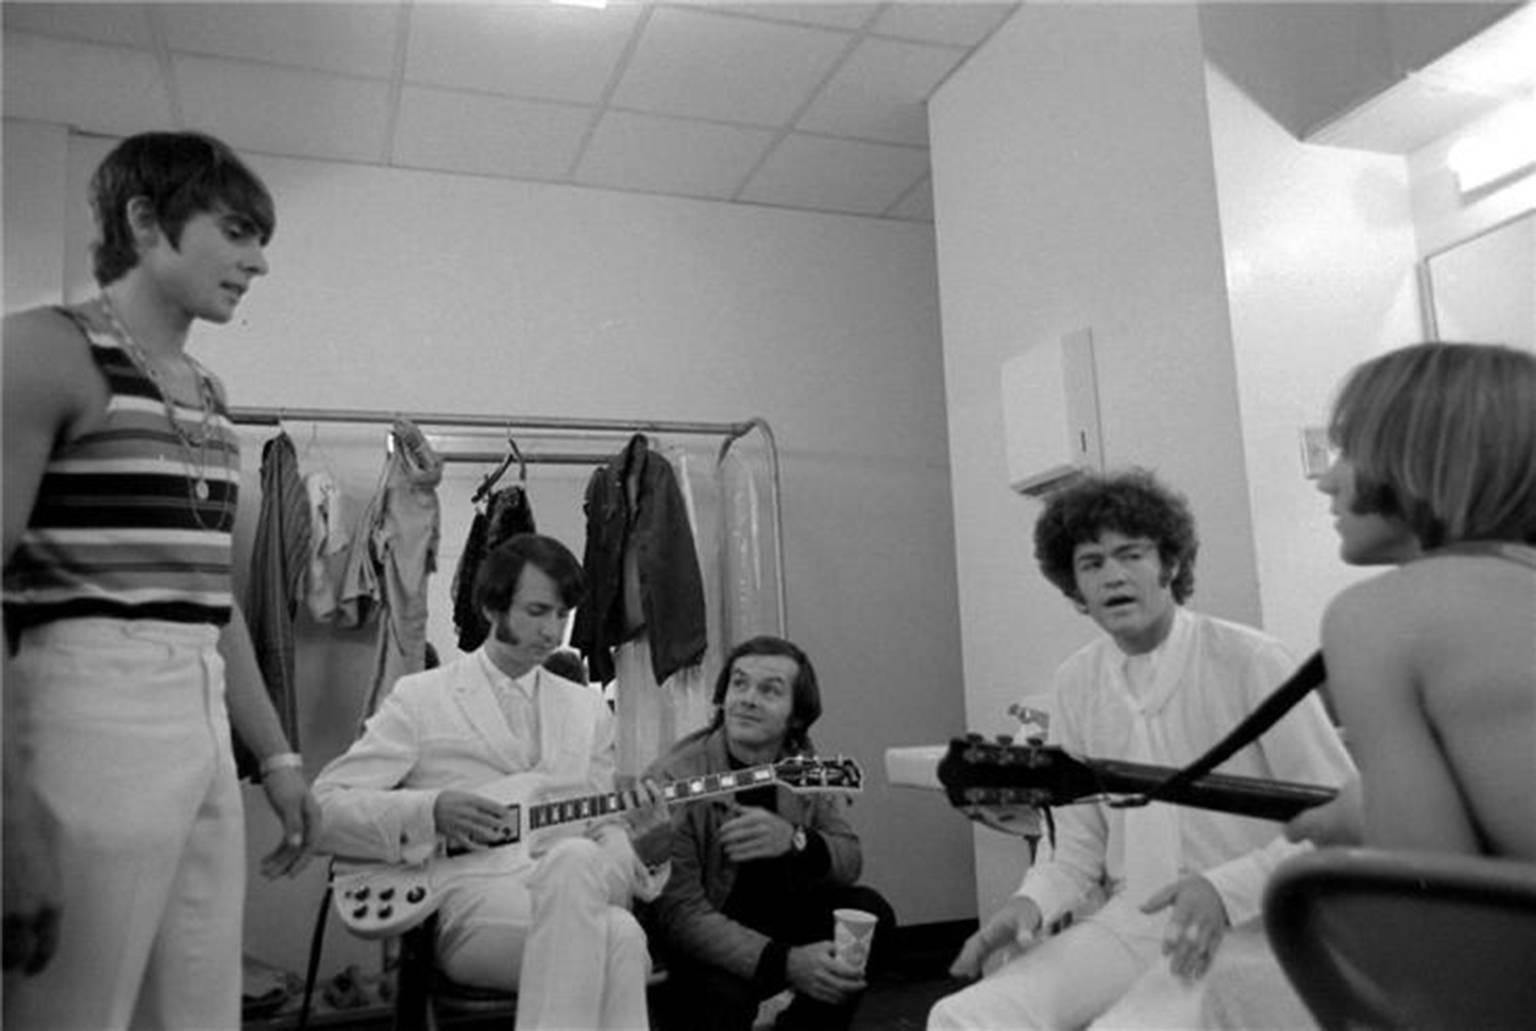 Henry Diltz Black and White Photograph - The Monkees & Jack Nicholson